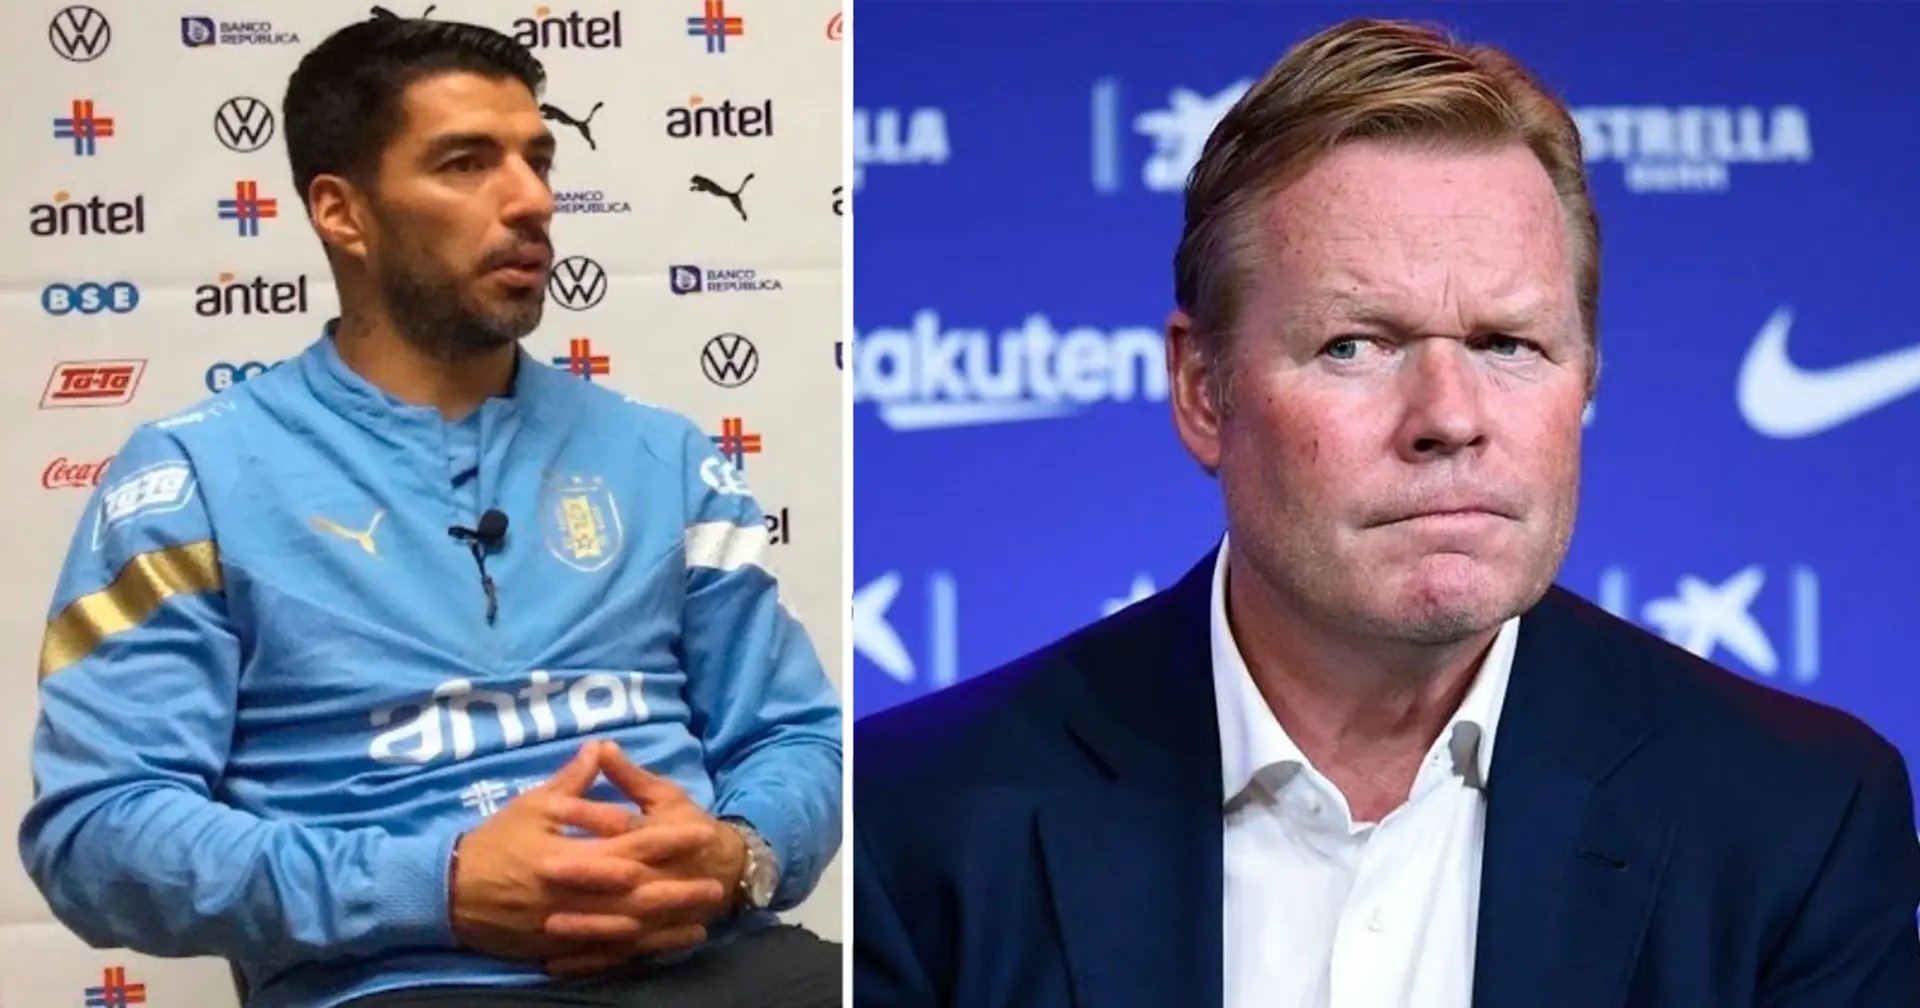 'I wish he told the truth to my face': Luis Suarez on Koeman kicking him out from Barca